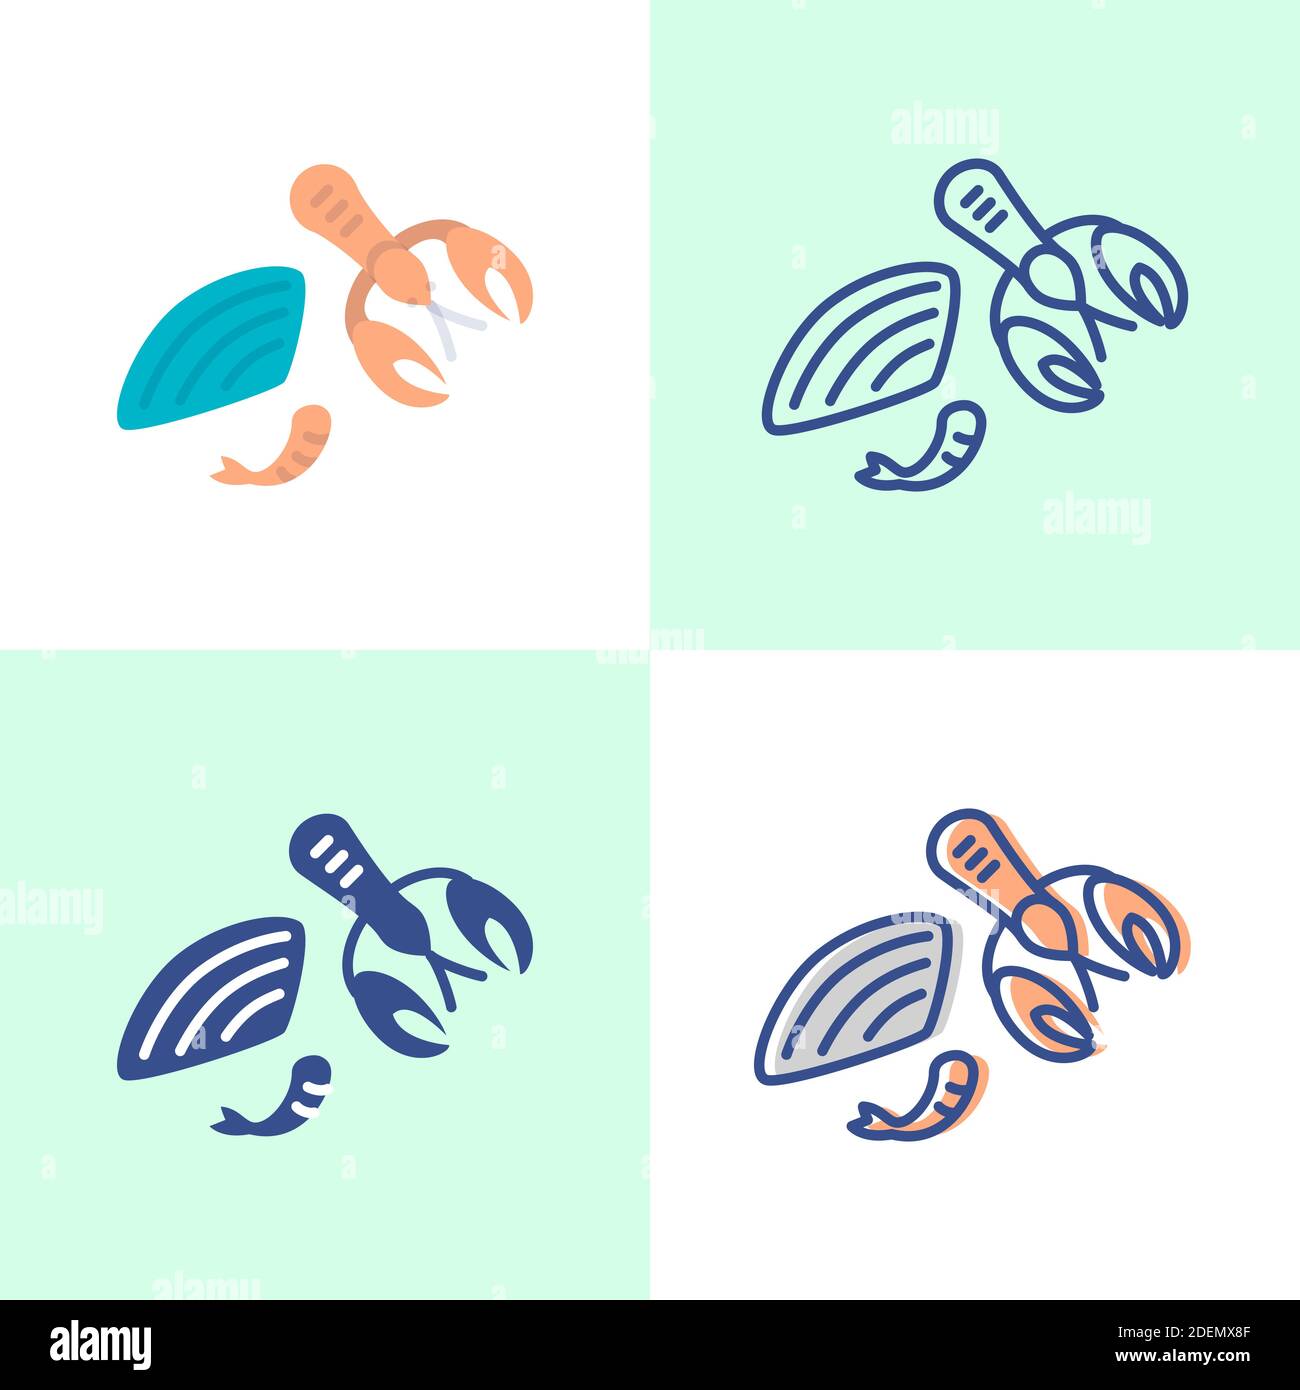 Shellfish icon set in flat and line style. Seafood symbols - shell, crayfish and shrimp. Vector illustration. Stock Vector